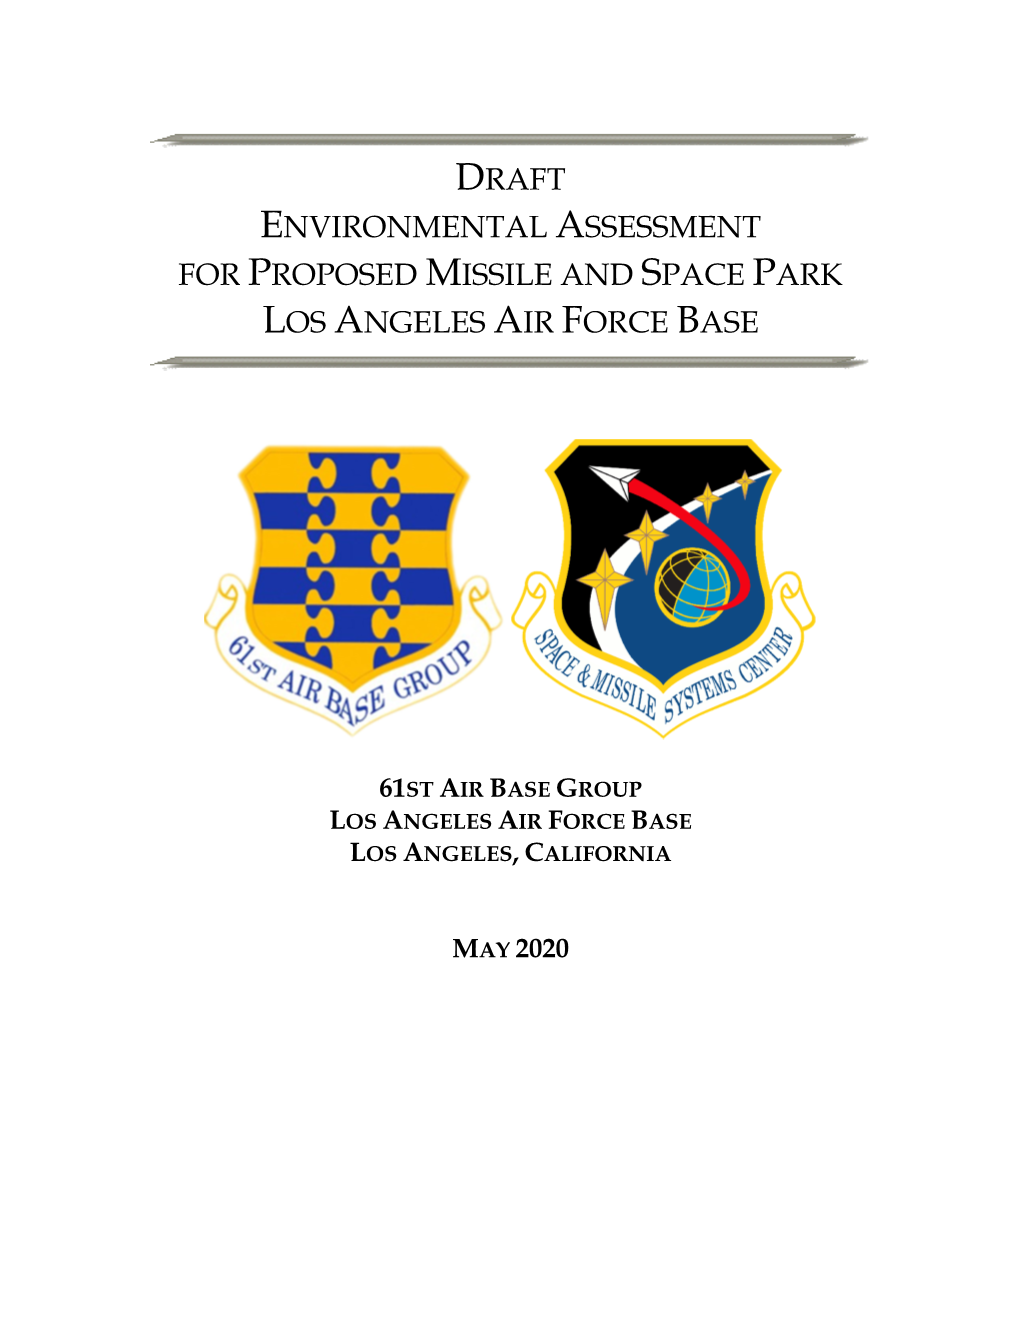 Environmental Assessment for Proposed Missile and Space Park Los Angeles Air Force Base